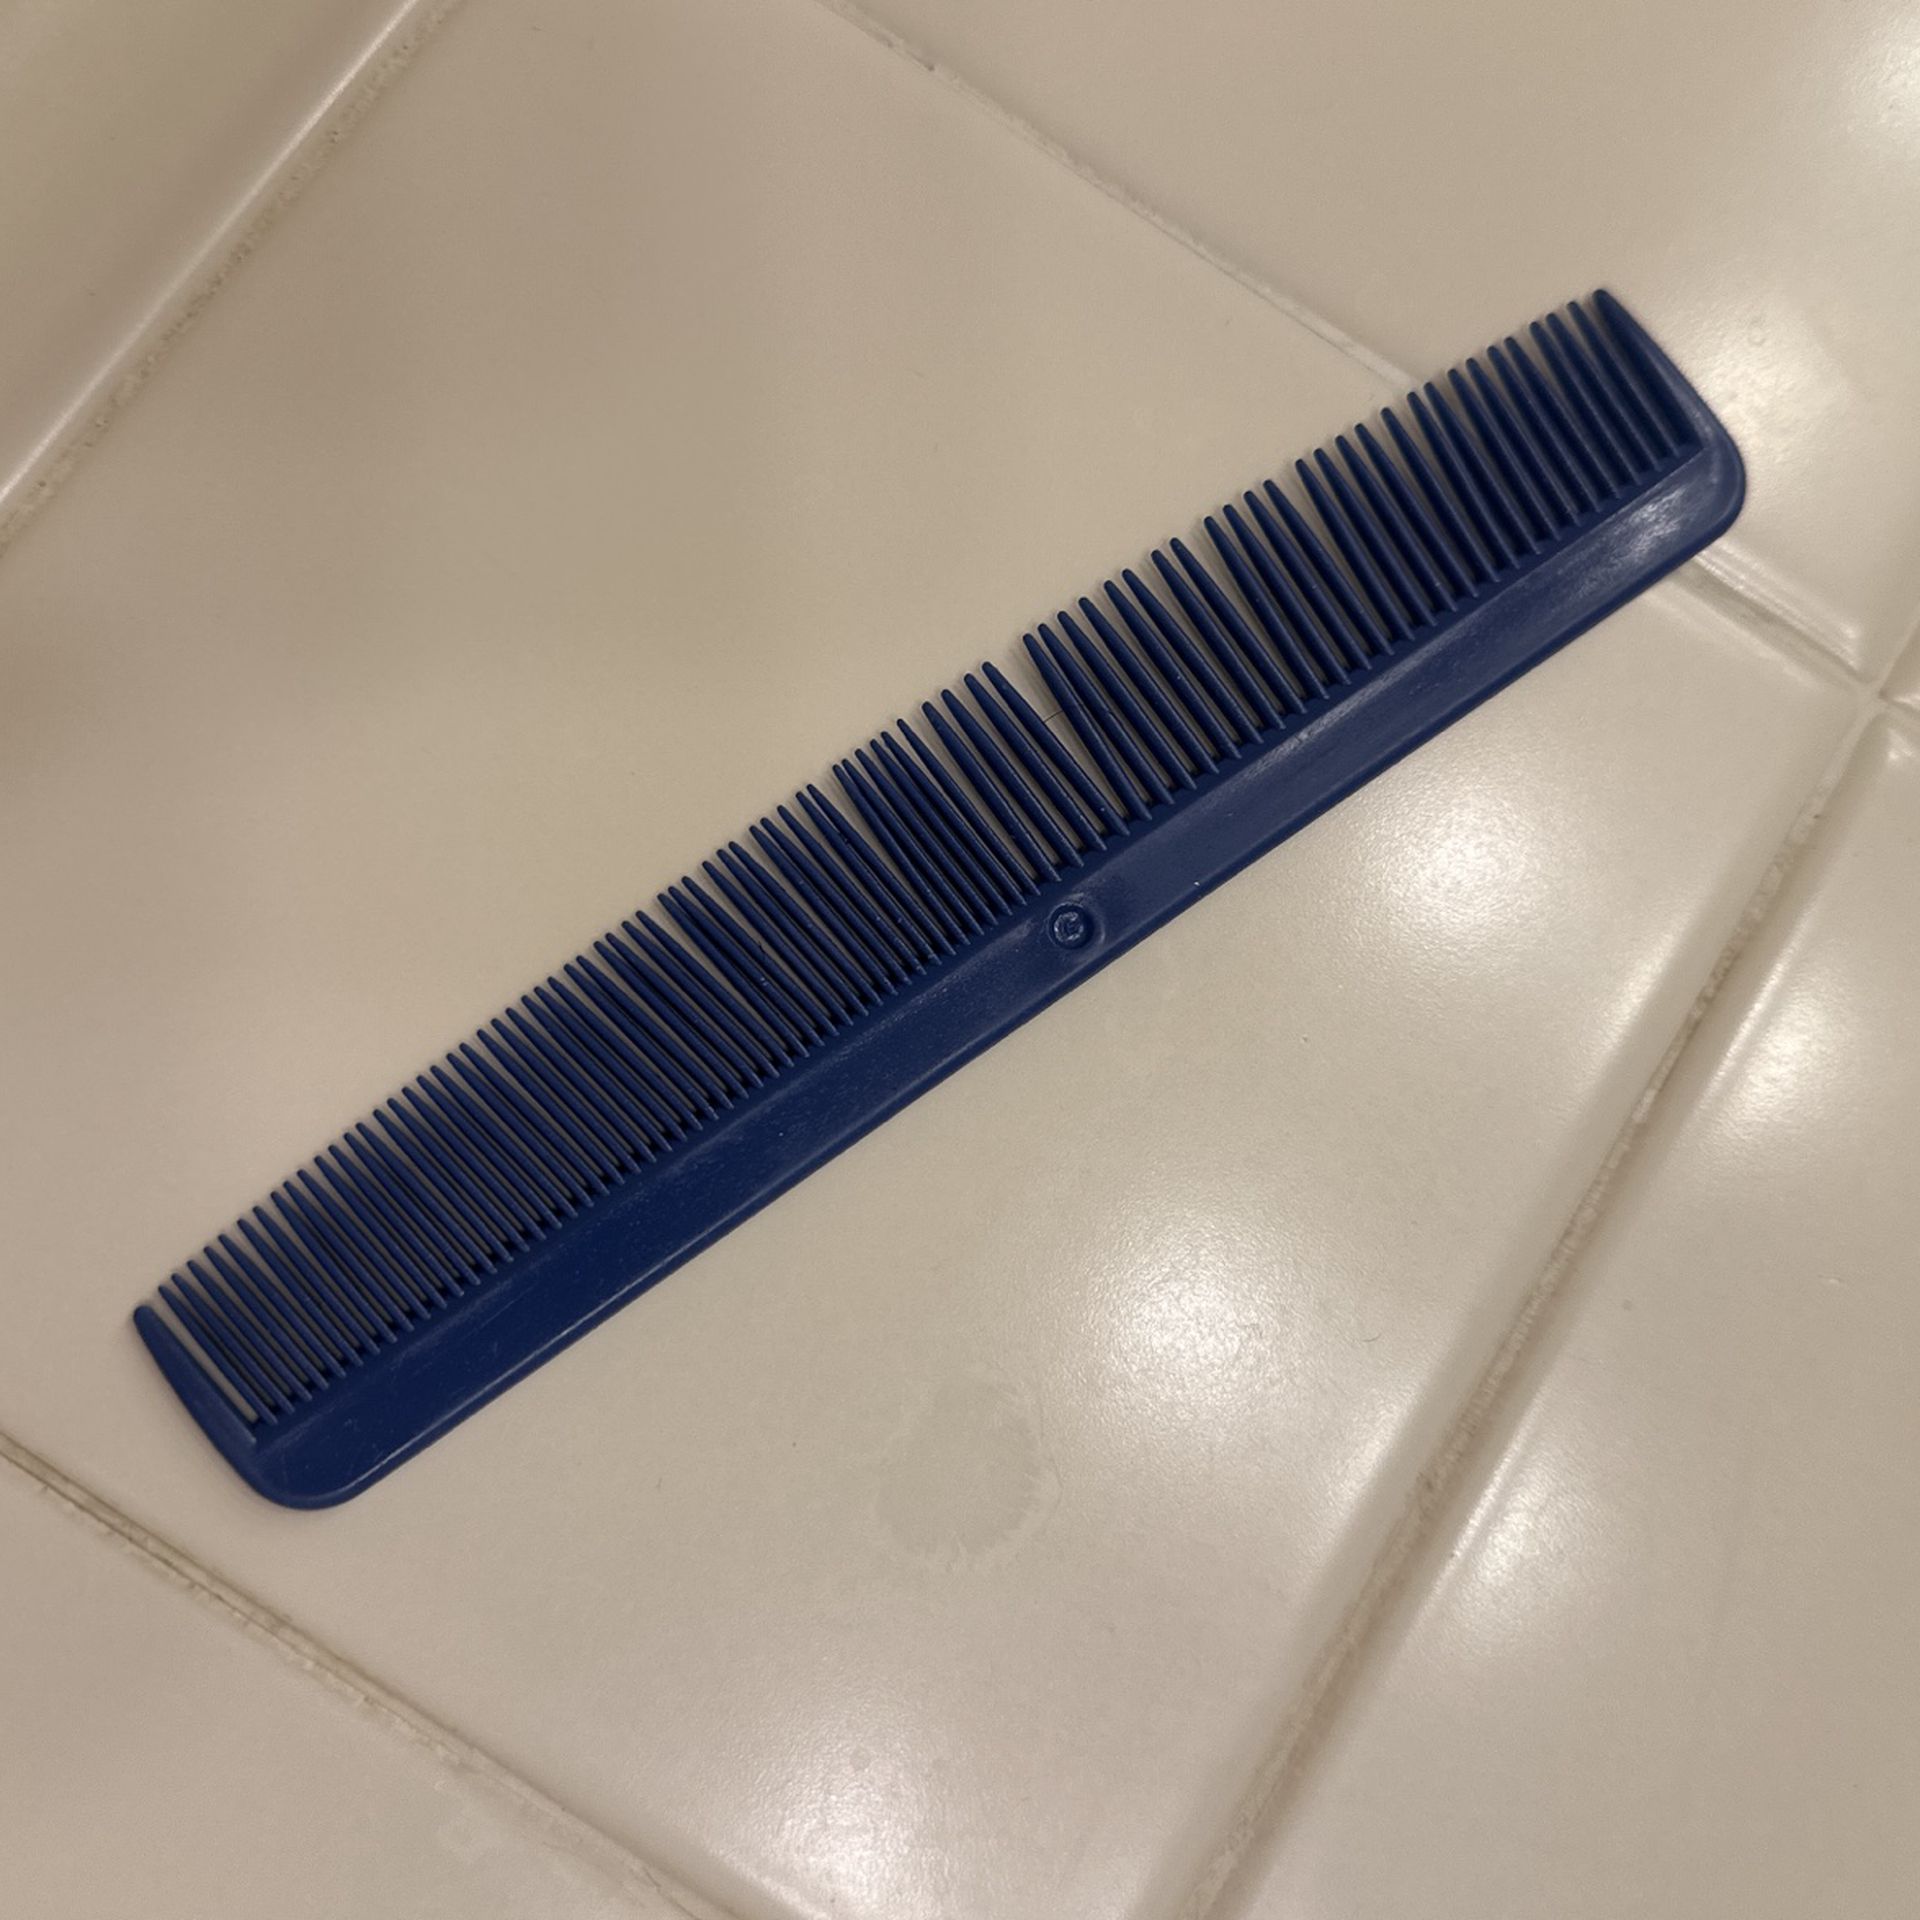 Comb (Early Access Exclusive)